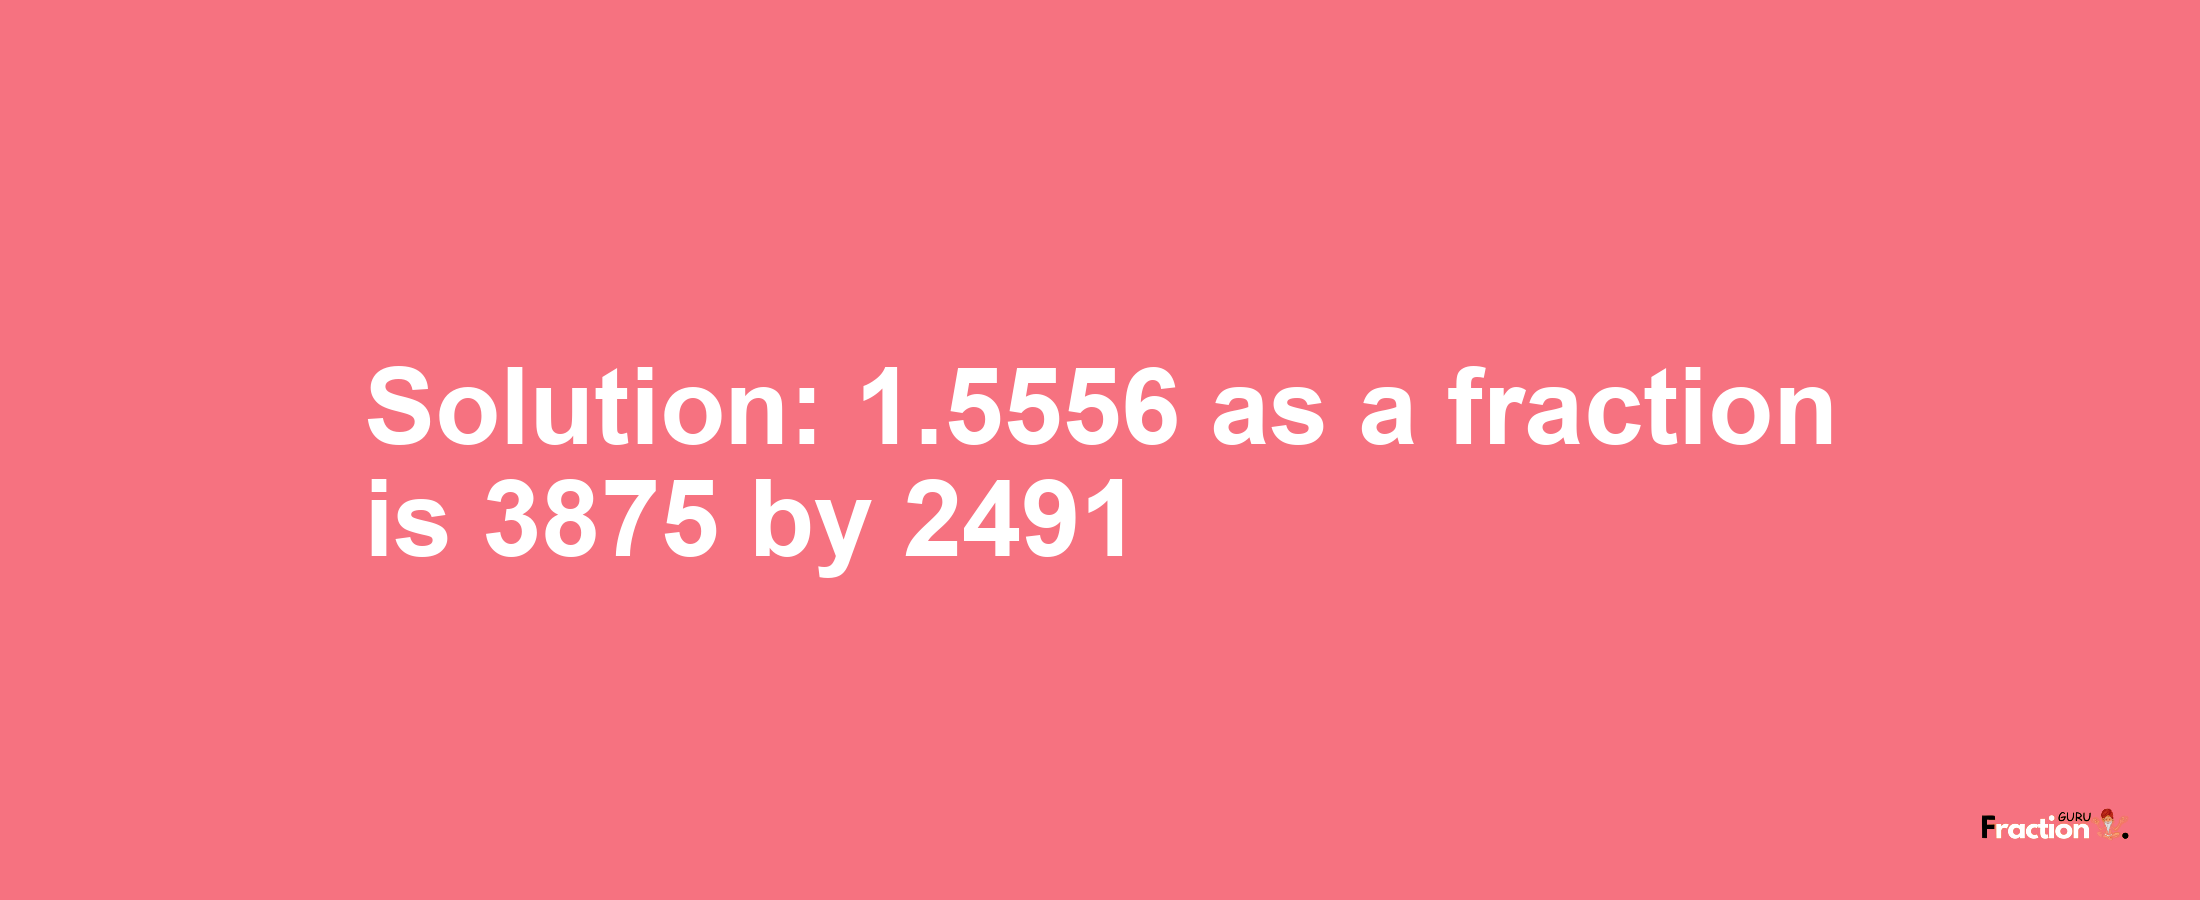 Solution:1.5556 as a fraction is 3875/2491